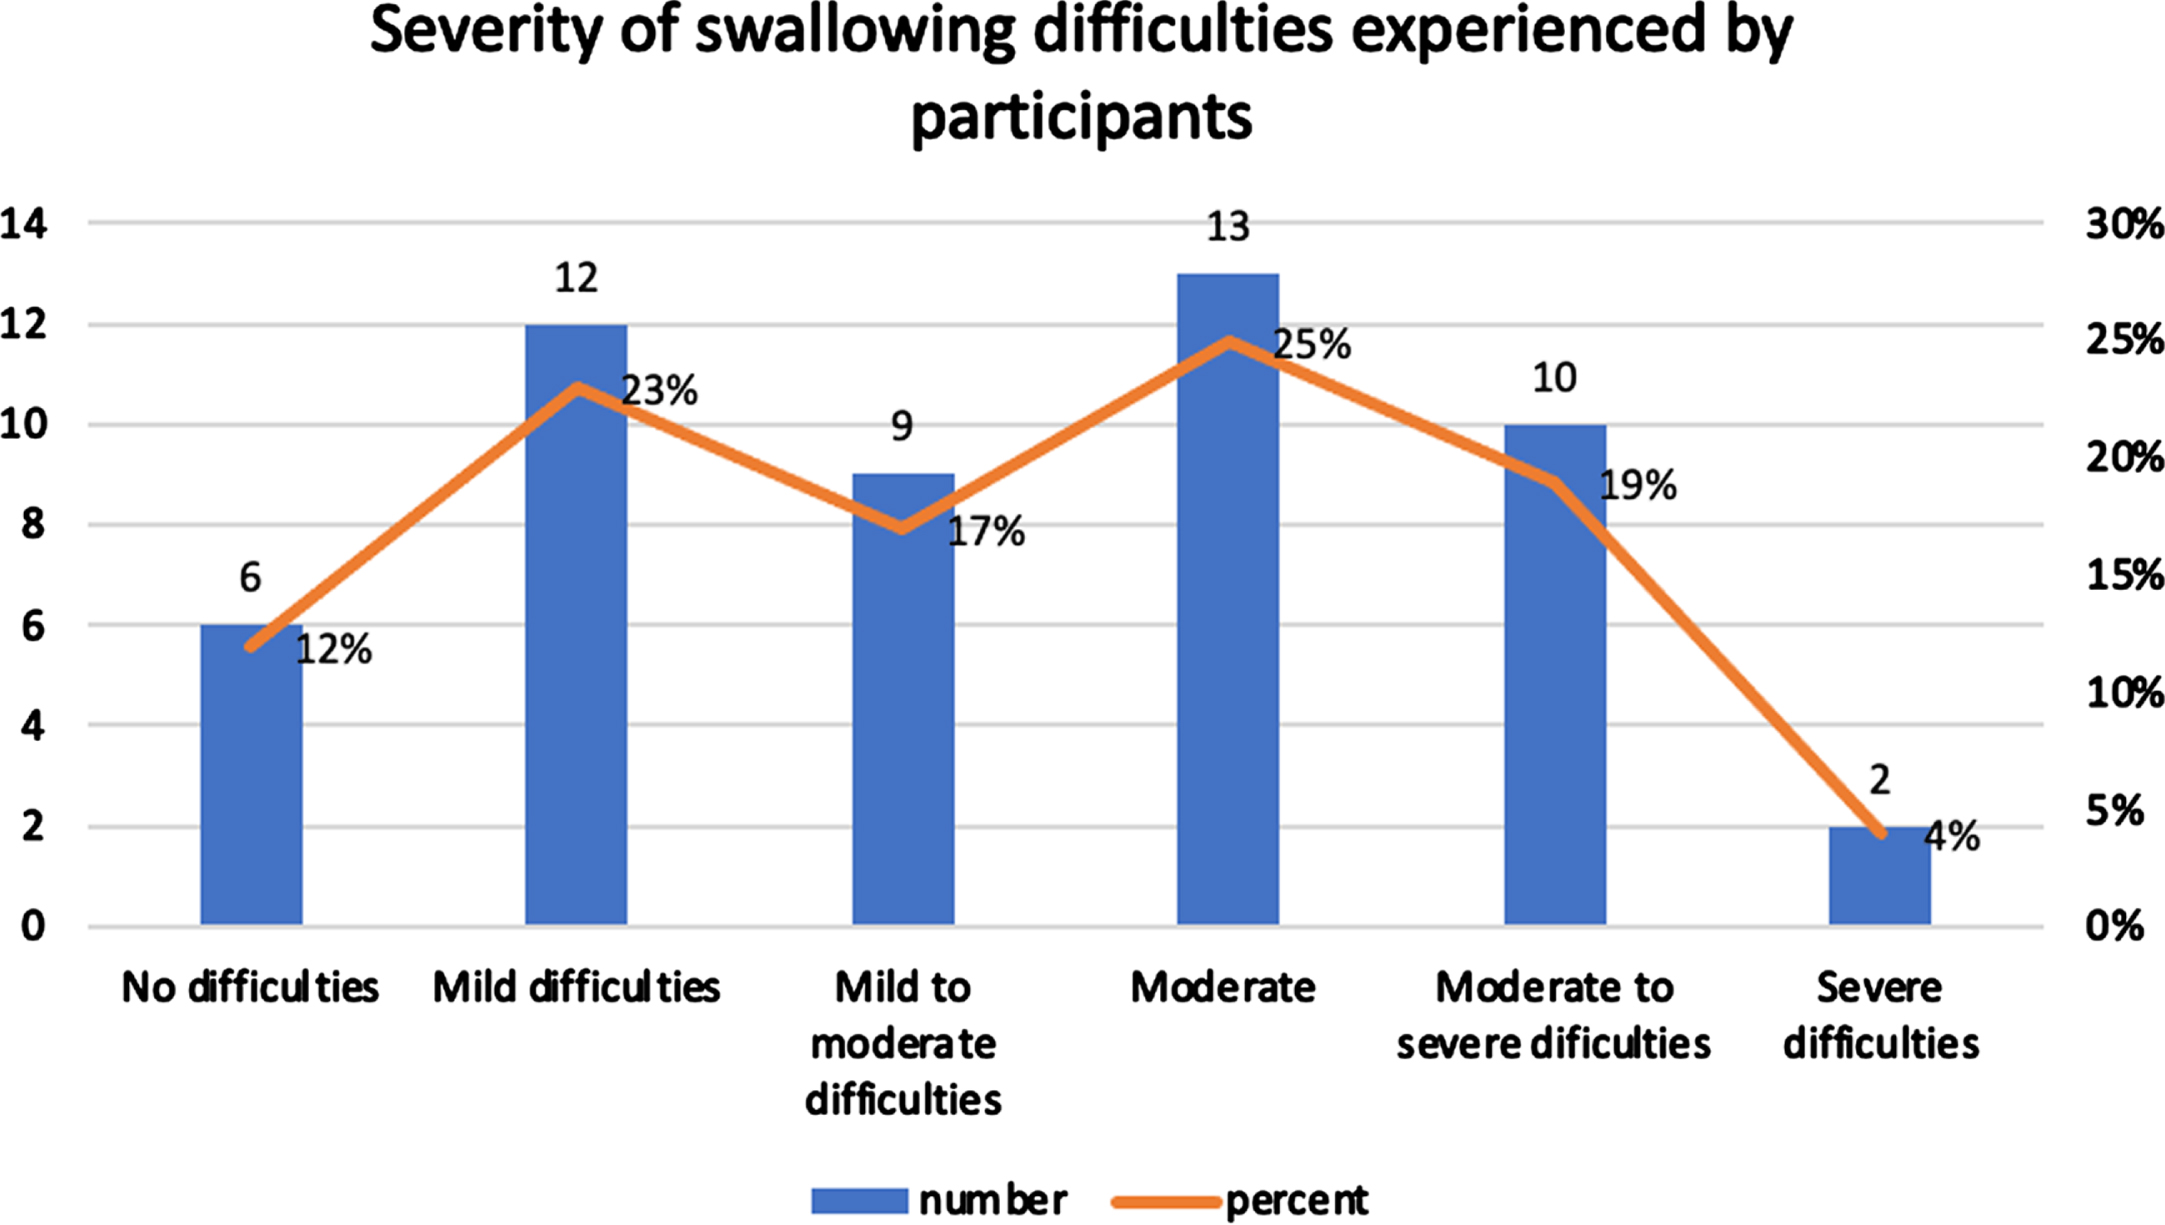 Severity of swallowing difficulties reported by participants.